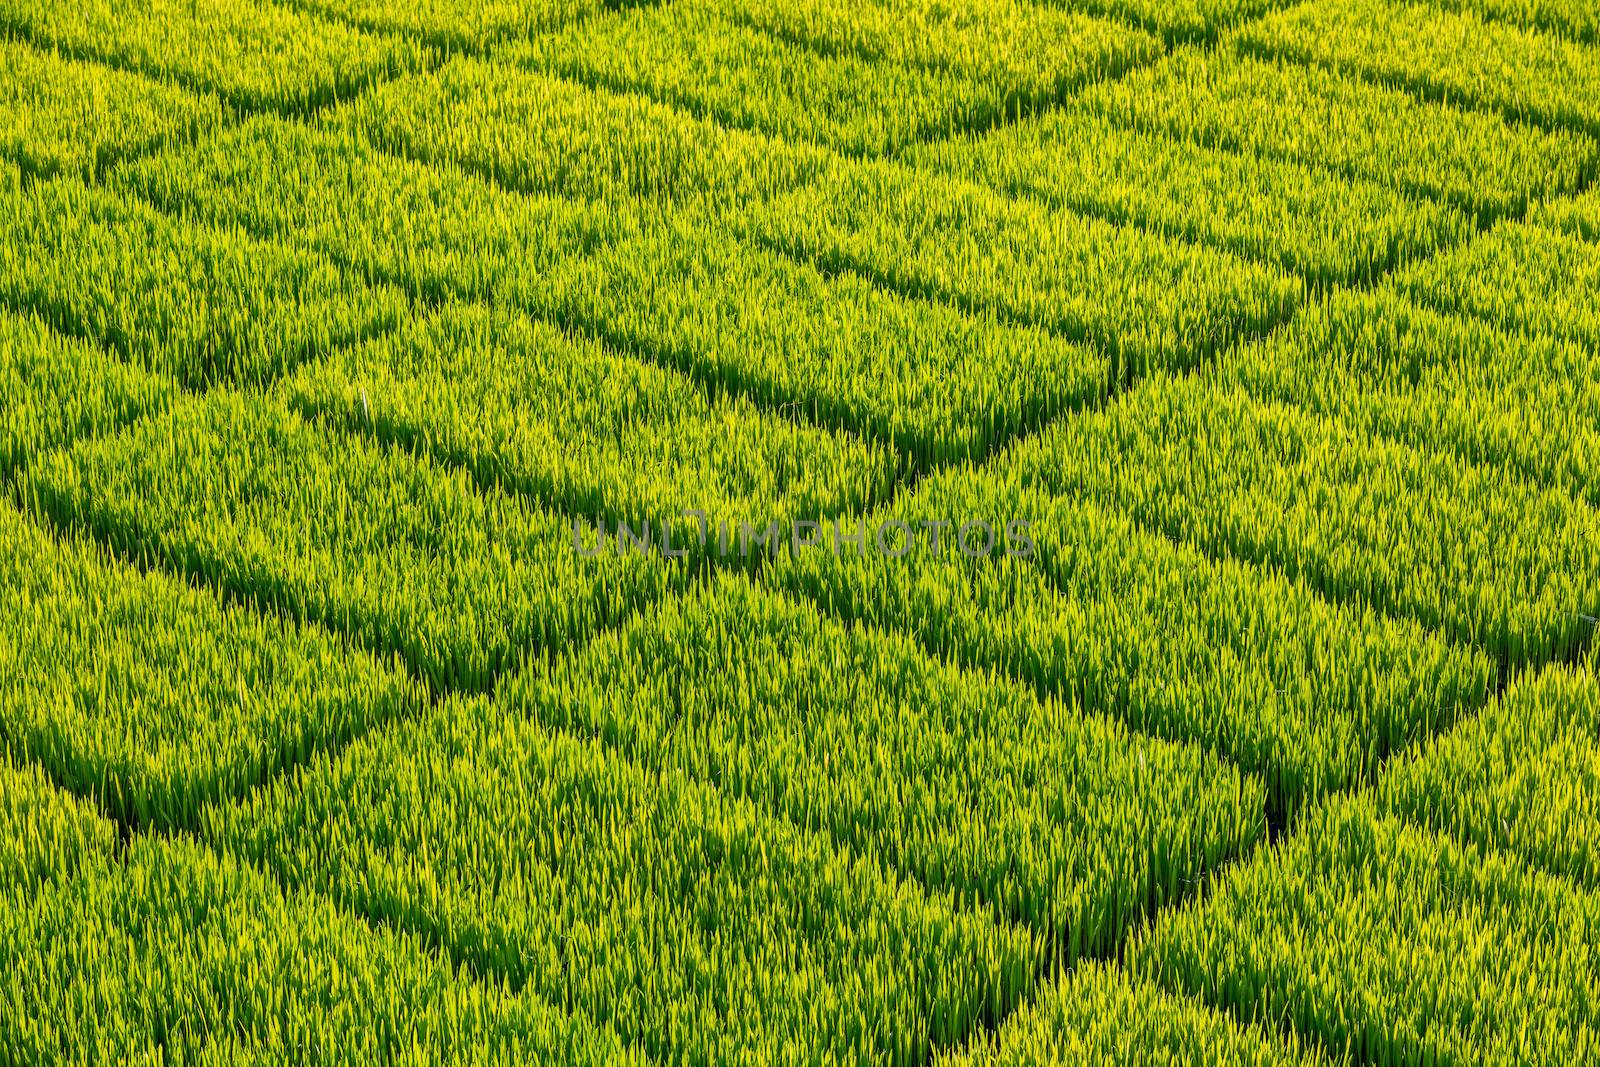 Rice field by smuay